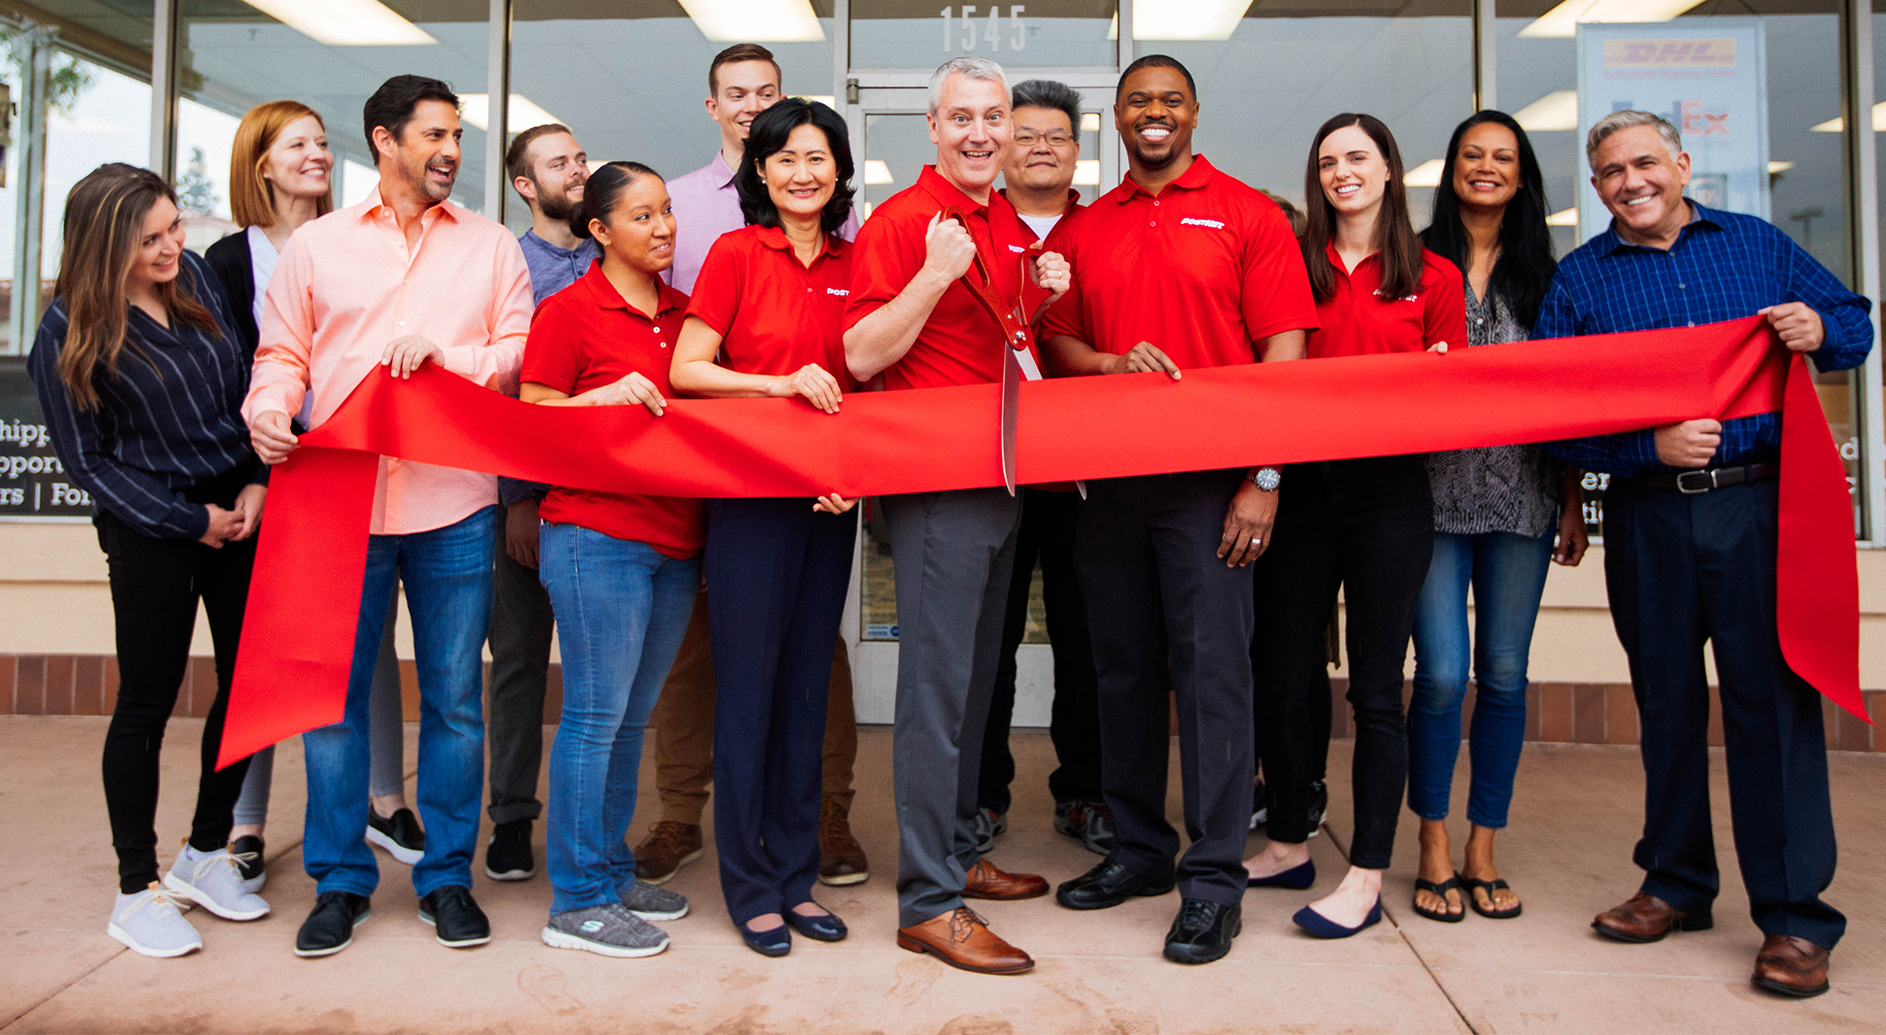 Group of Postnet employees celebrating grand opening and cutting a large red ribbon.